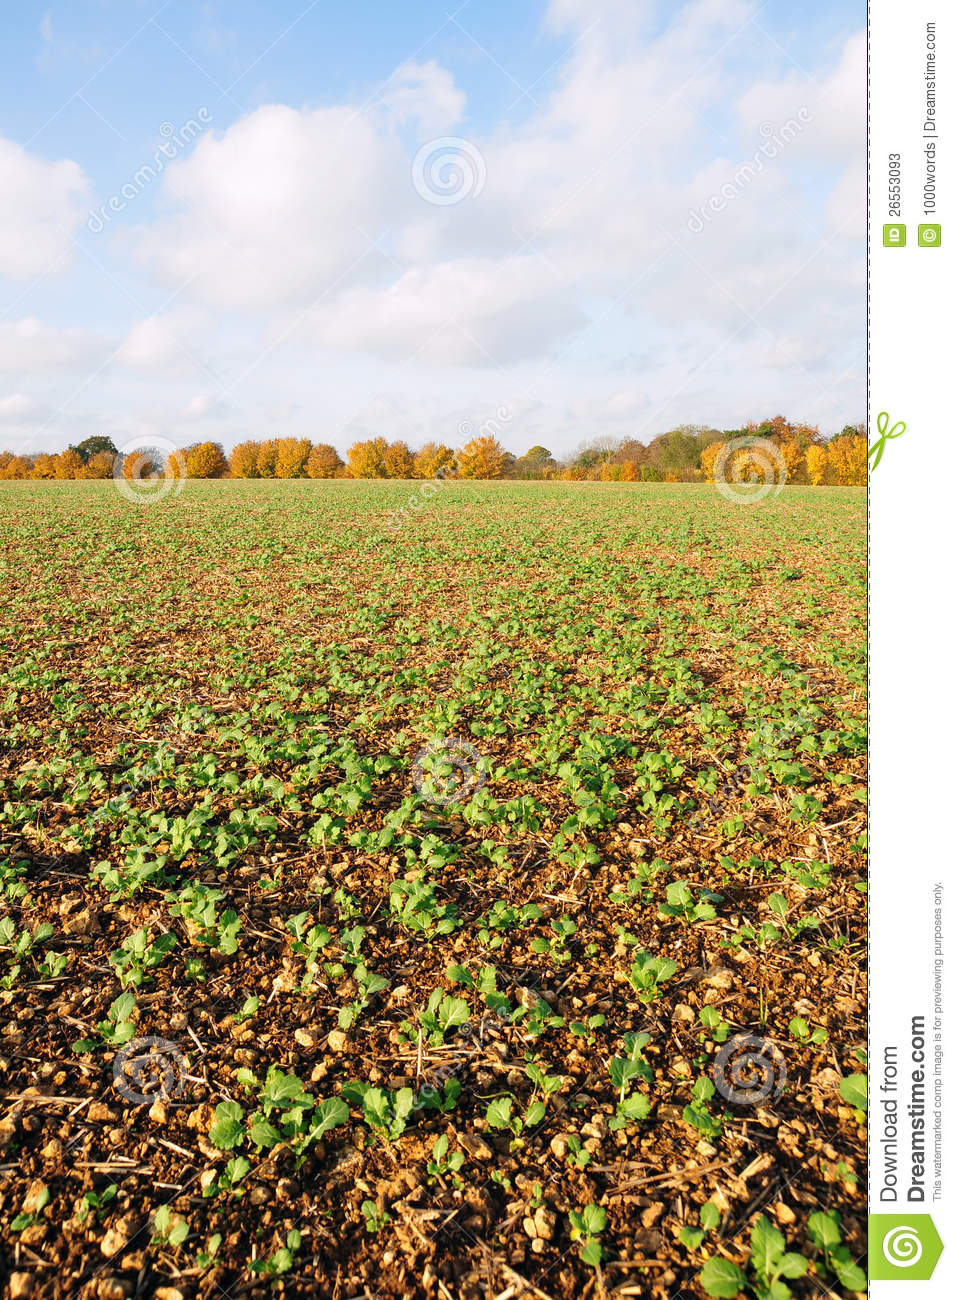 Crops Growing Clipart Crops Growing On Farmland In